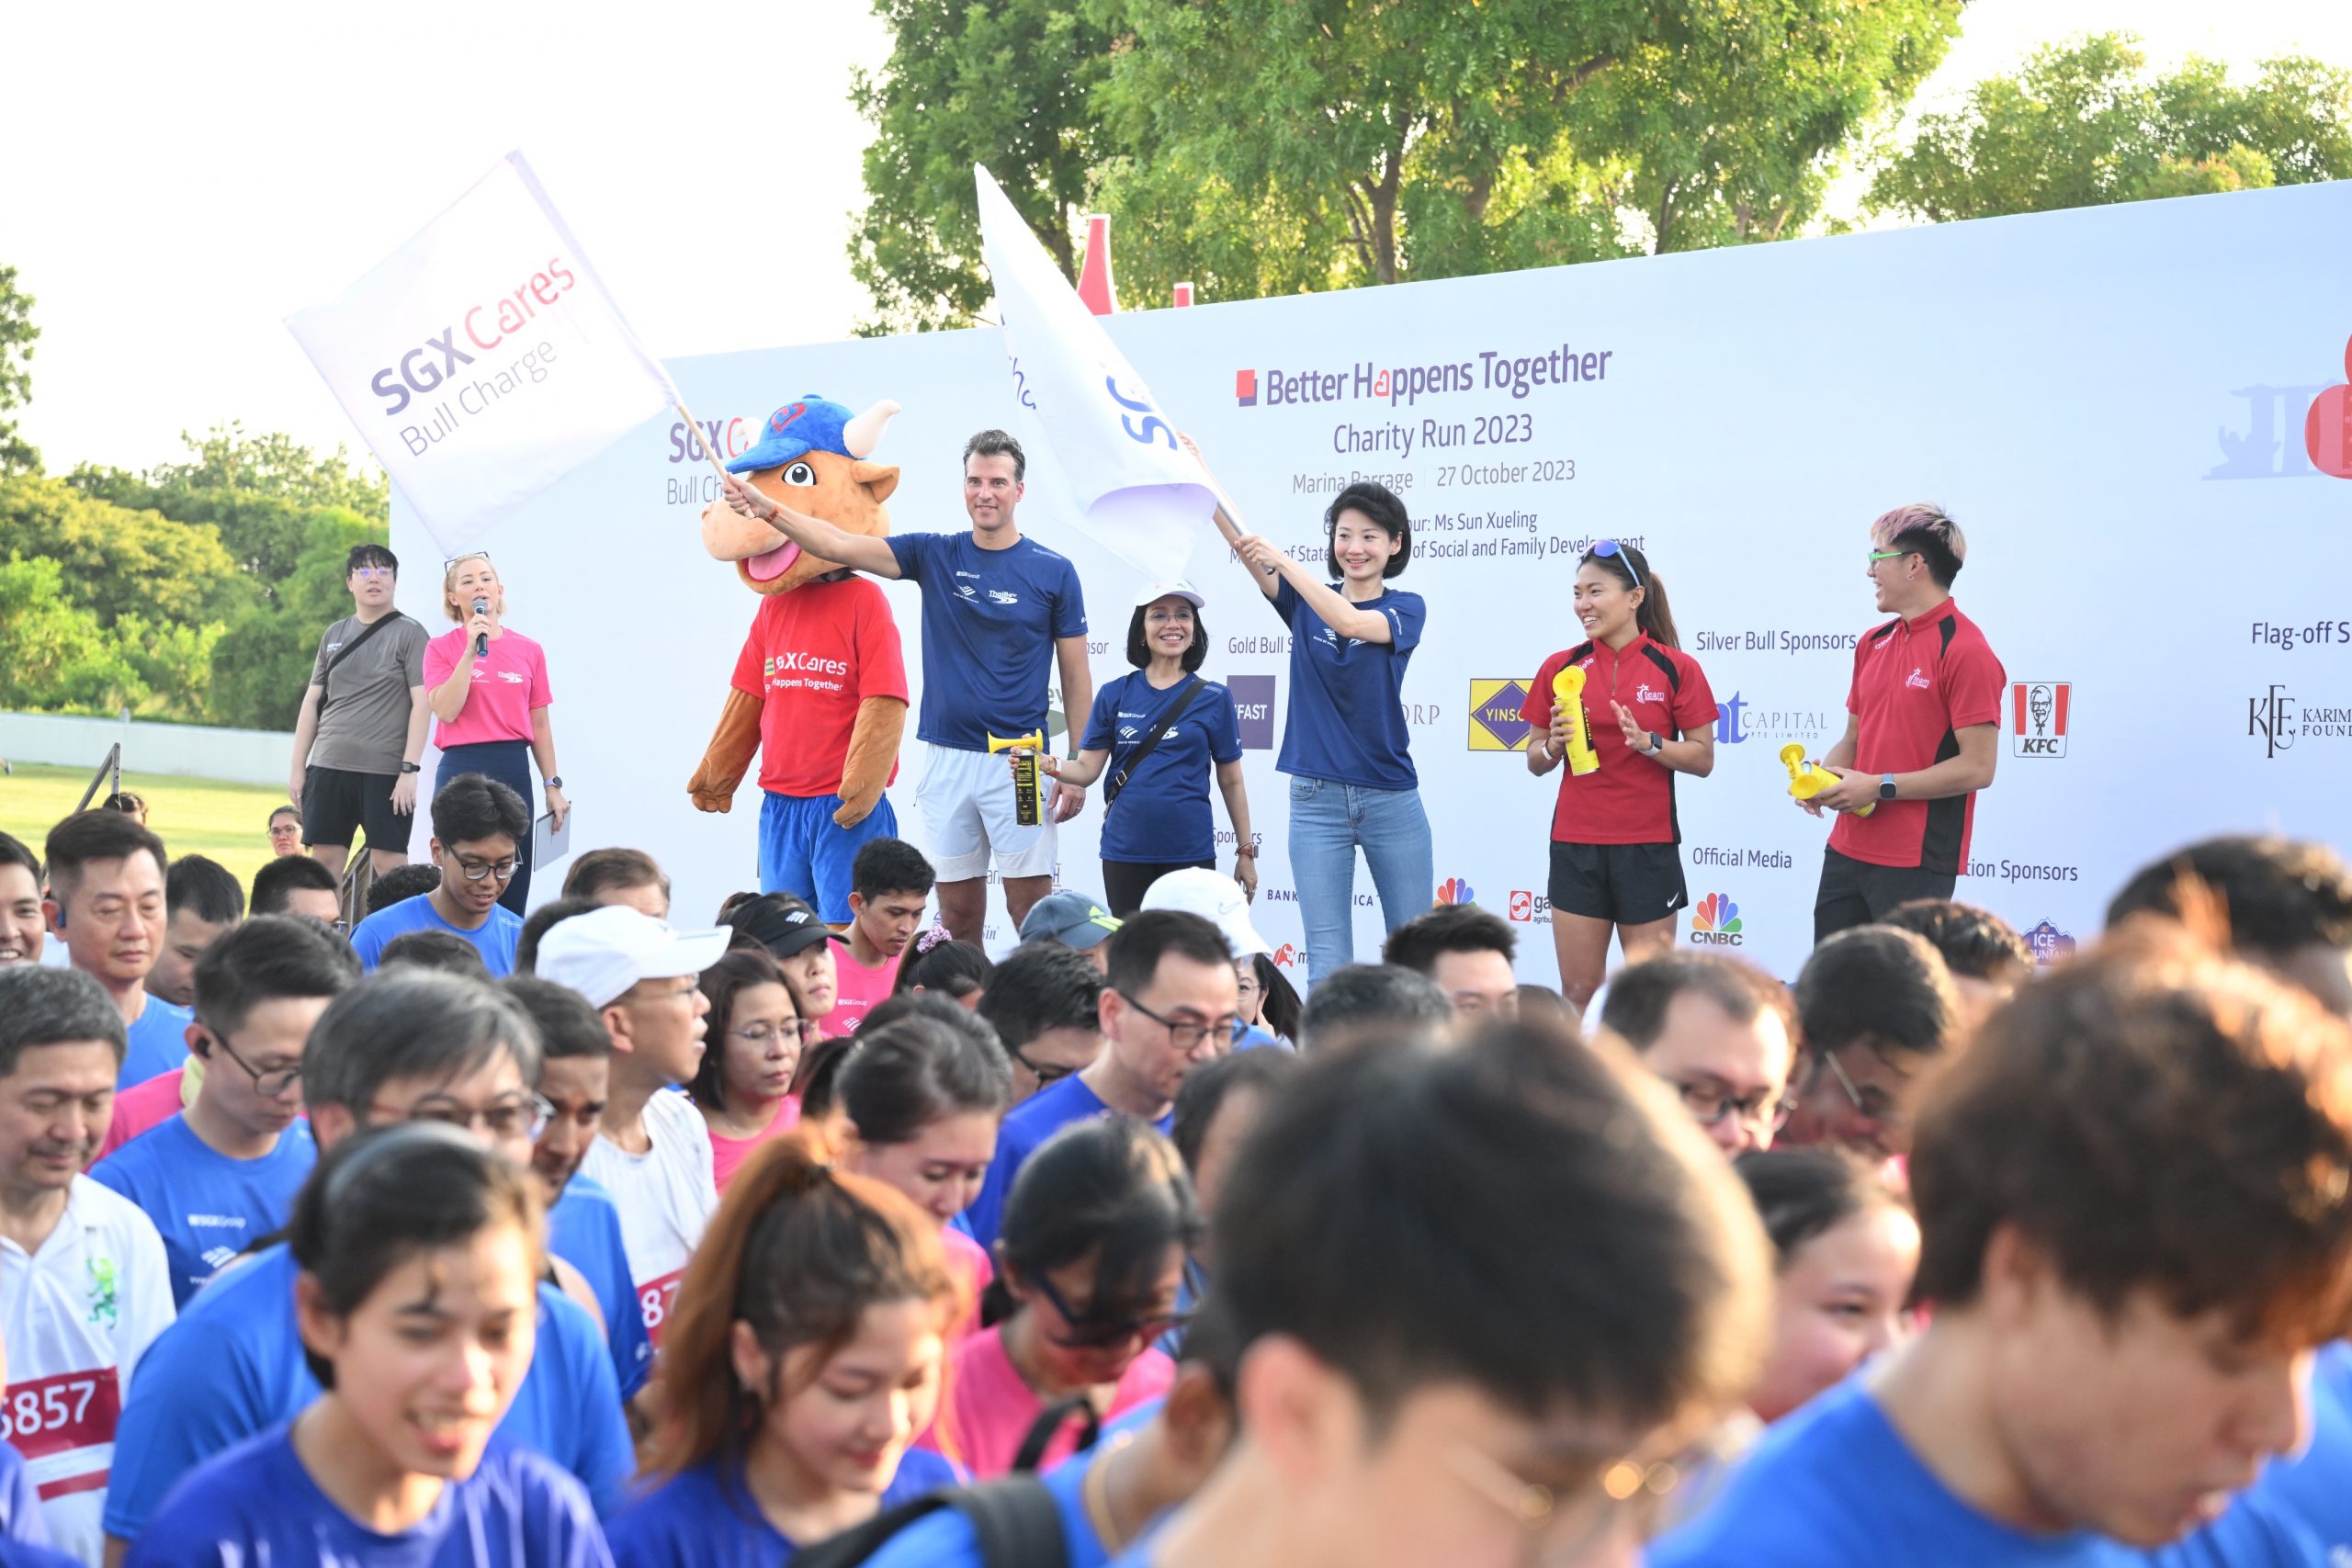 Minister of State for Social and Family Development Sun Xueling - SGX Cares Bull Charge Charity Run